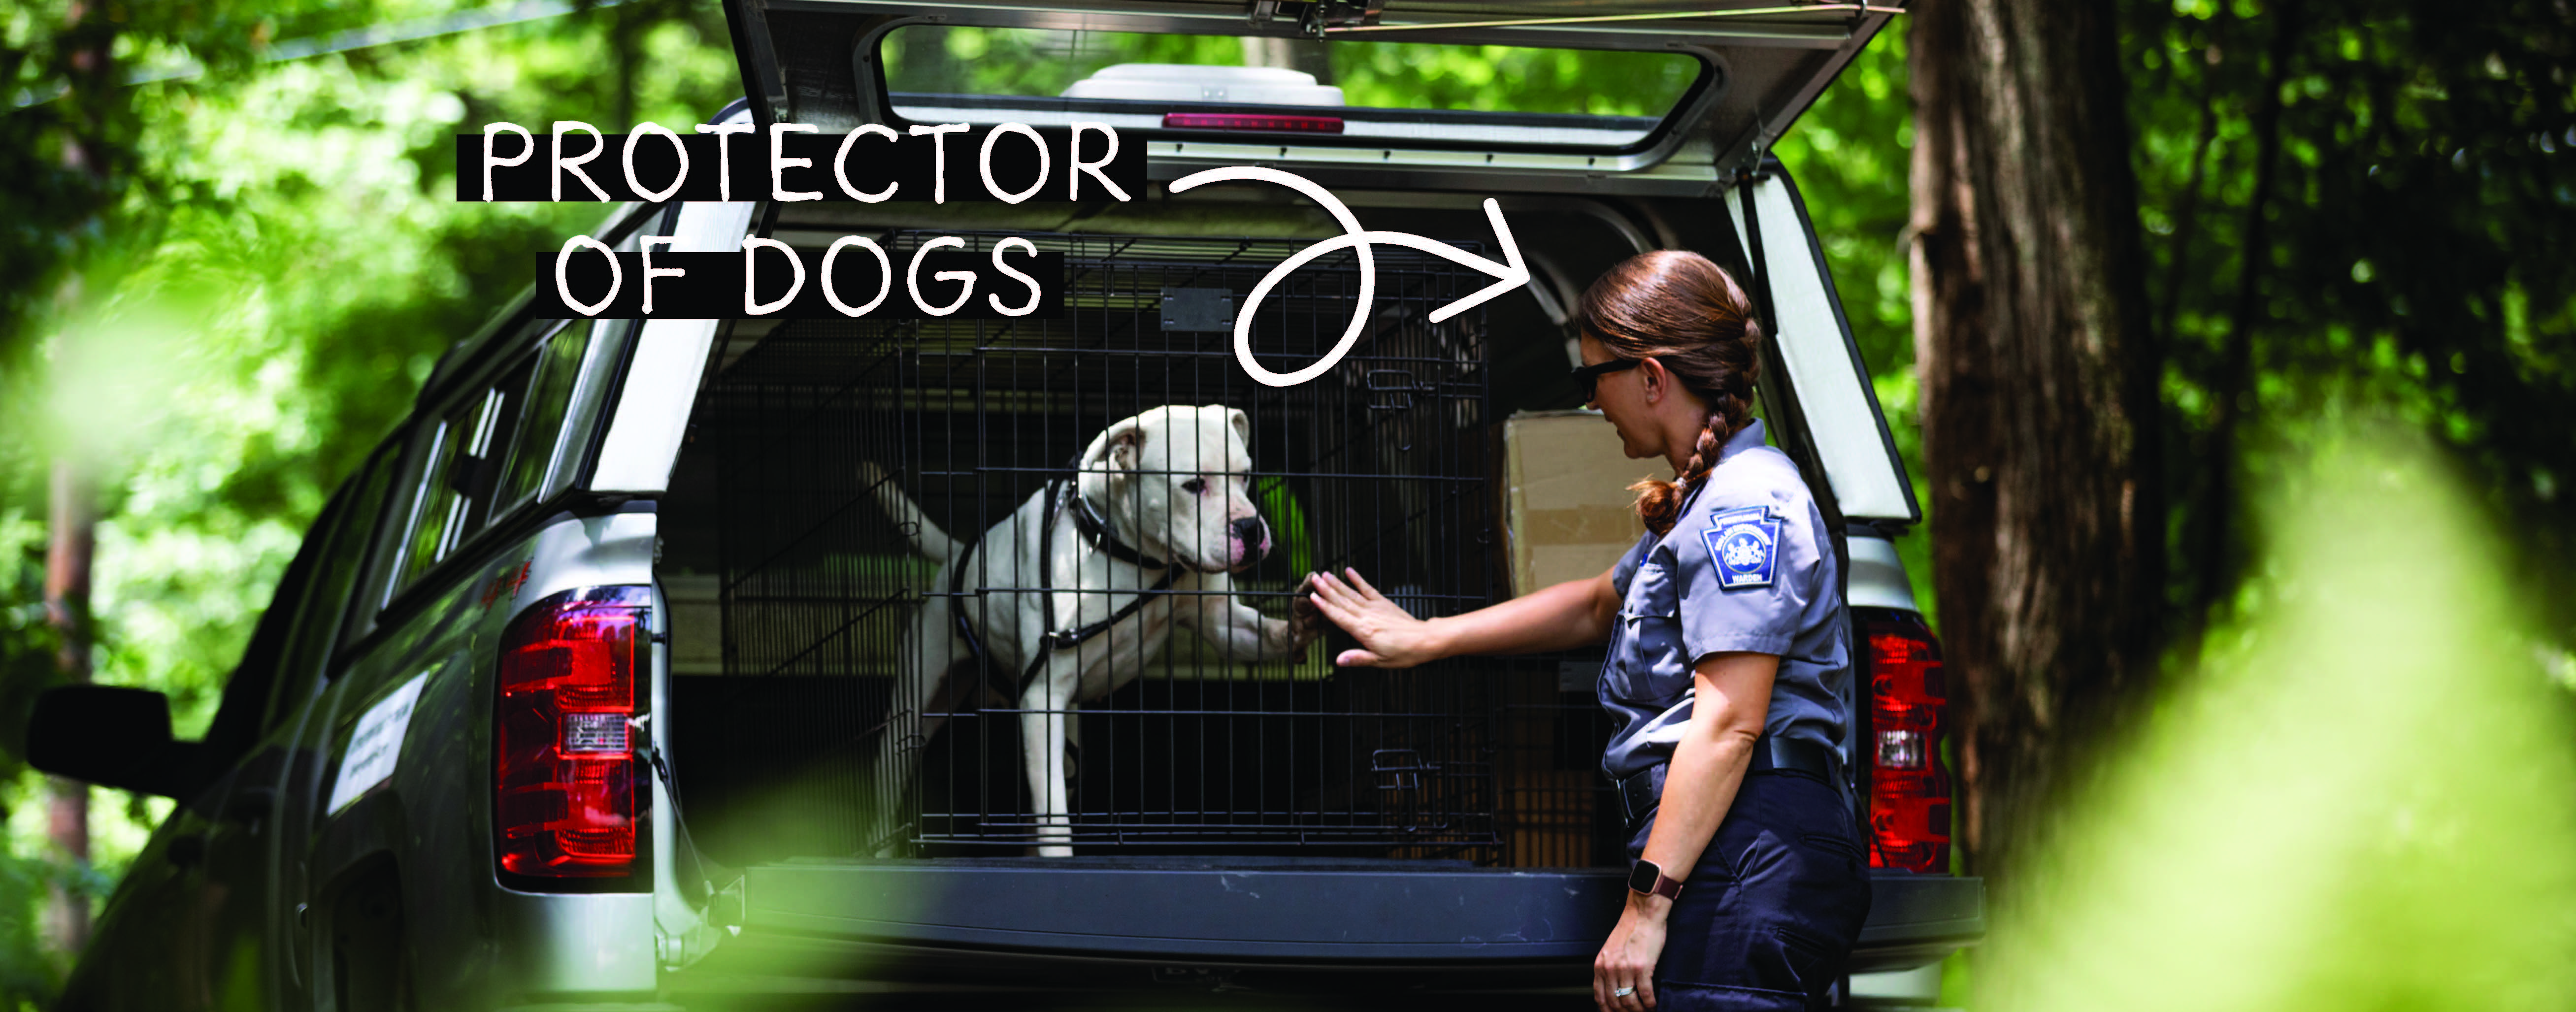 Protector of dogs, but will it last: picture of dog warden with stray dog emphasizing need to increase dog license fee